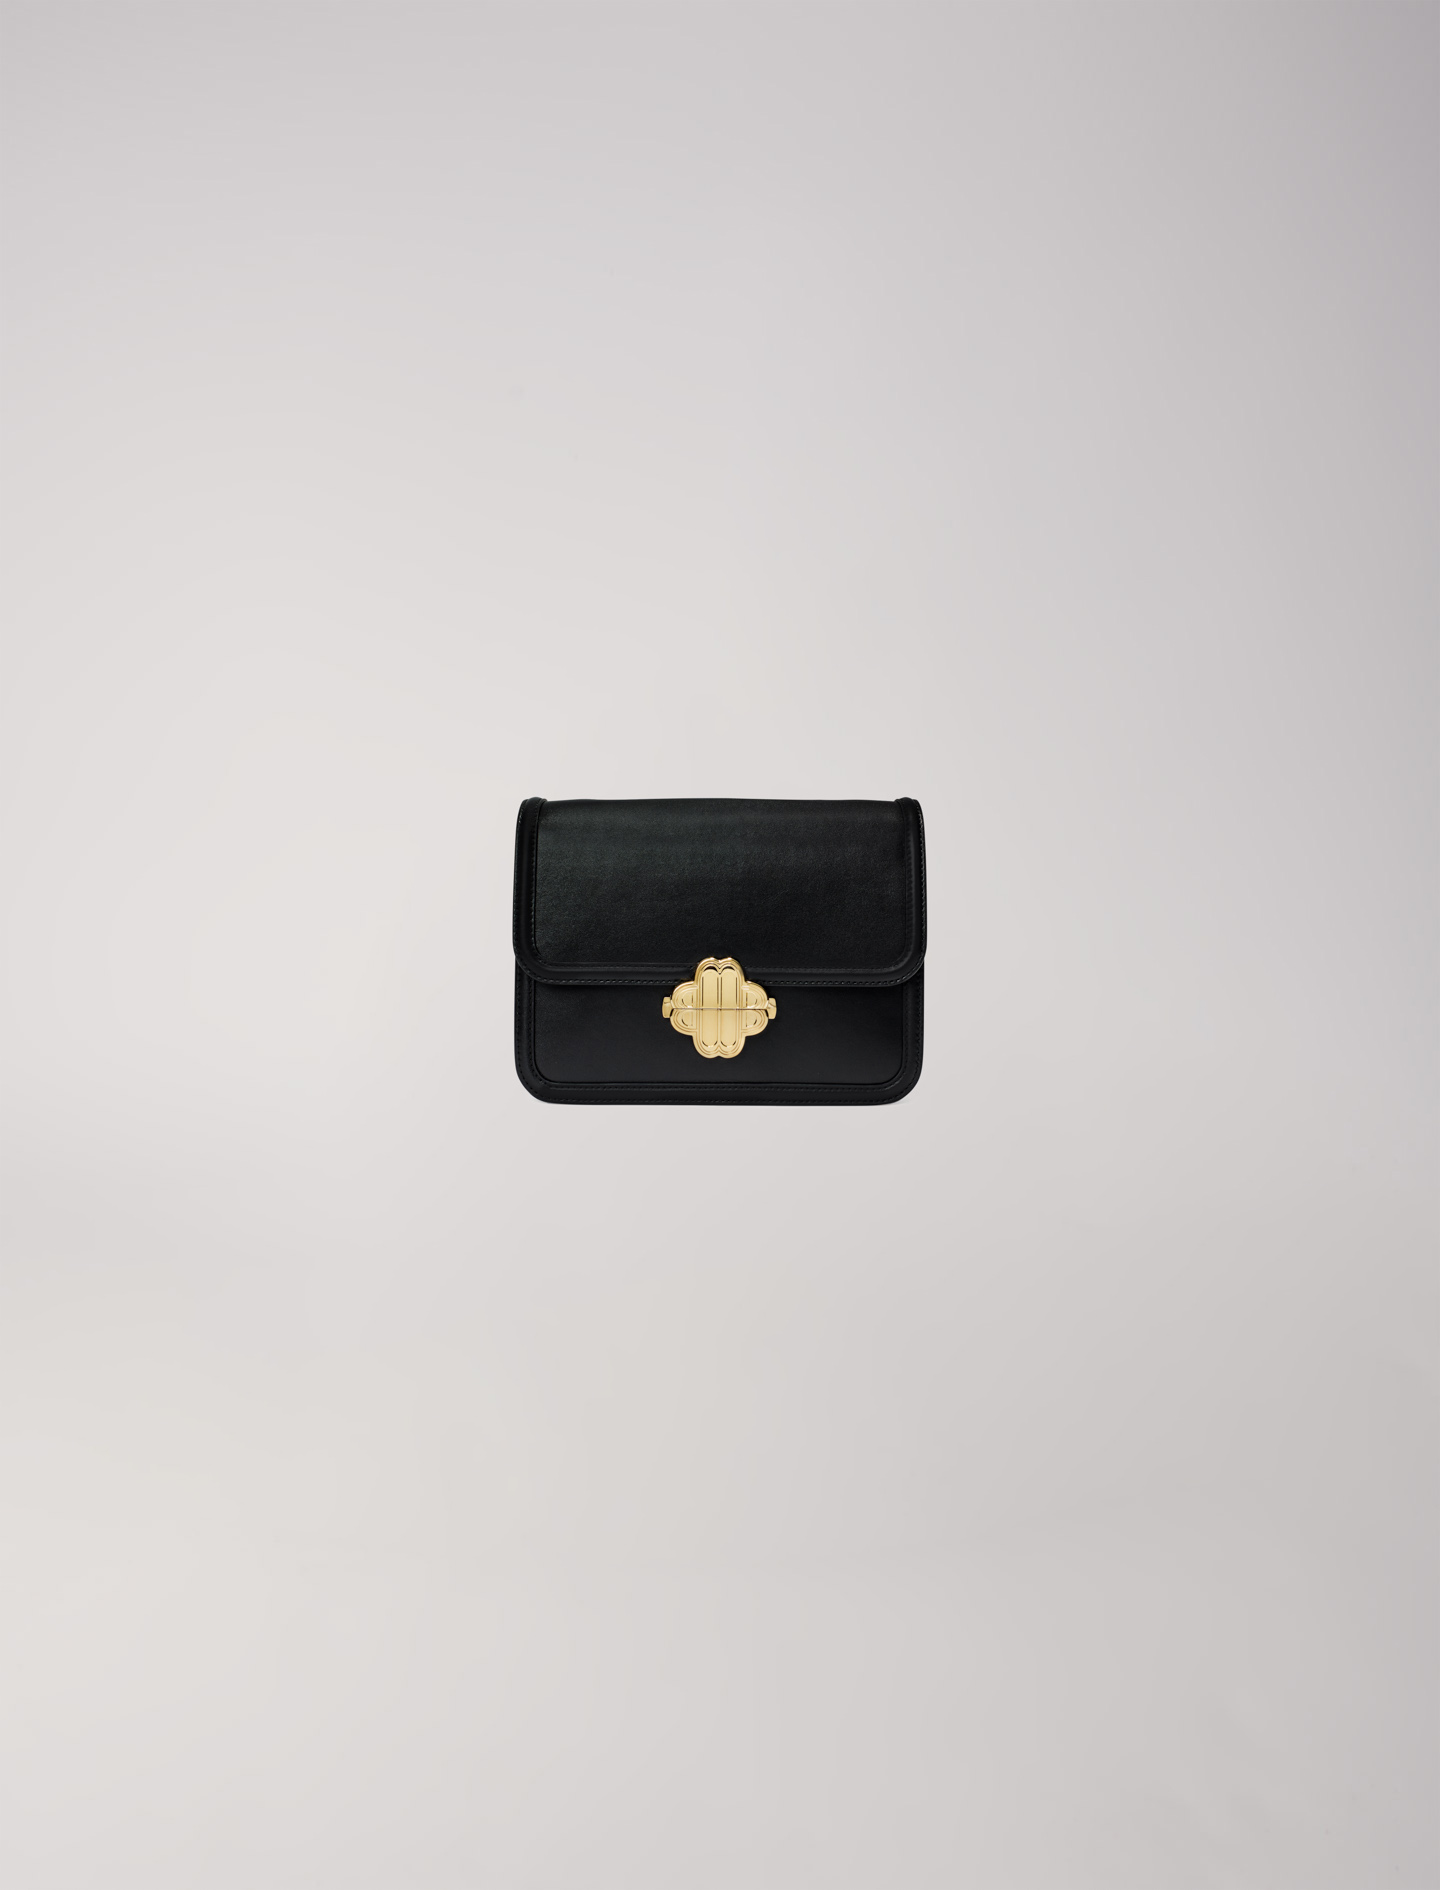 Maje Woman's cotton Clasp: Leather bag with clover clasp for Fall/Winter, in color Black / Black